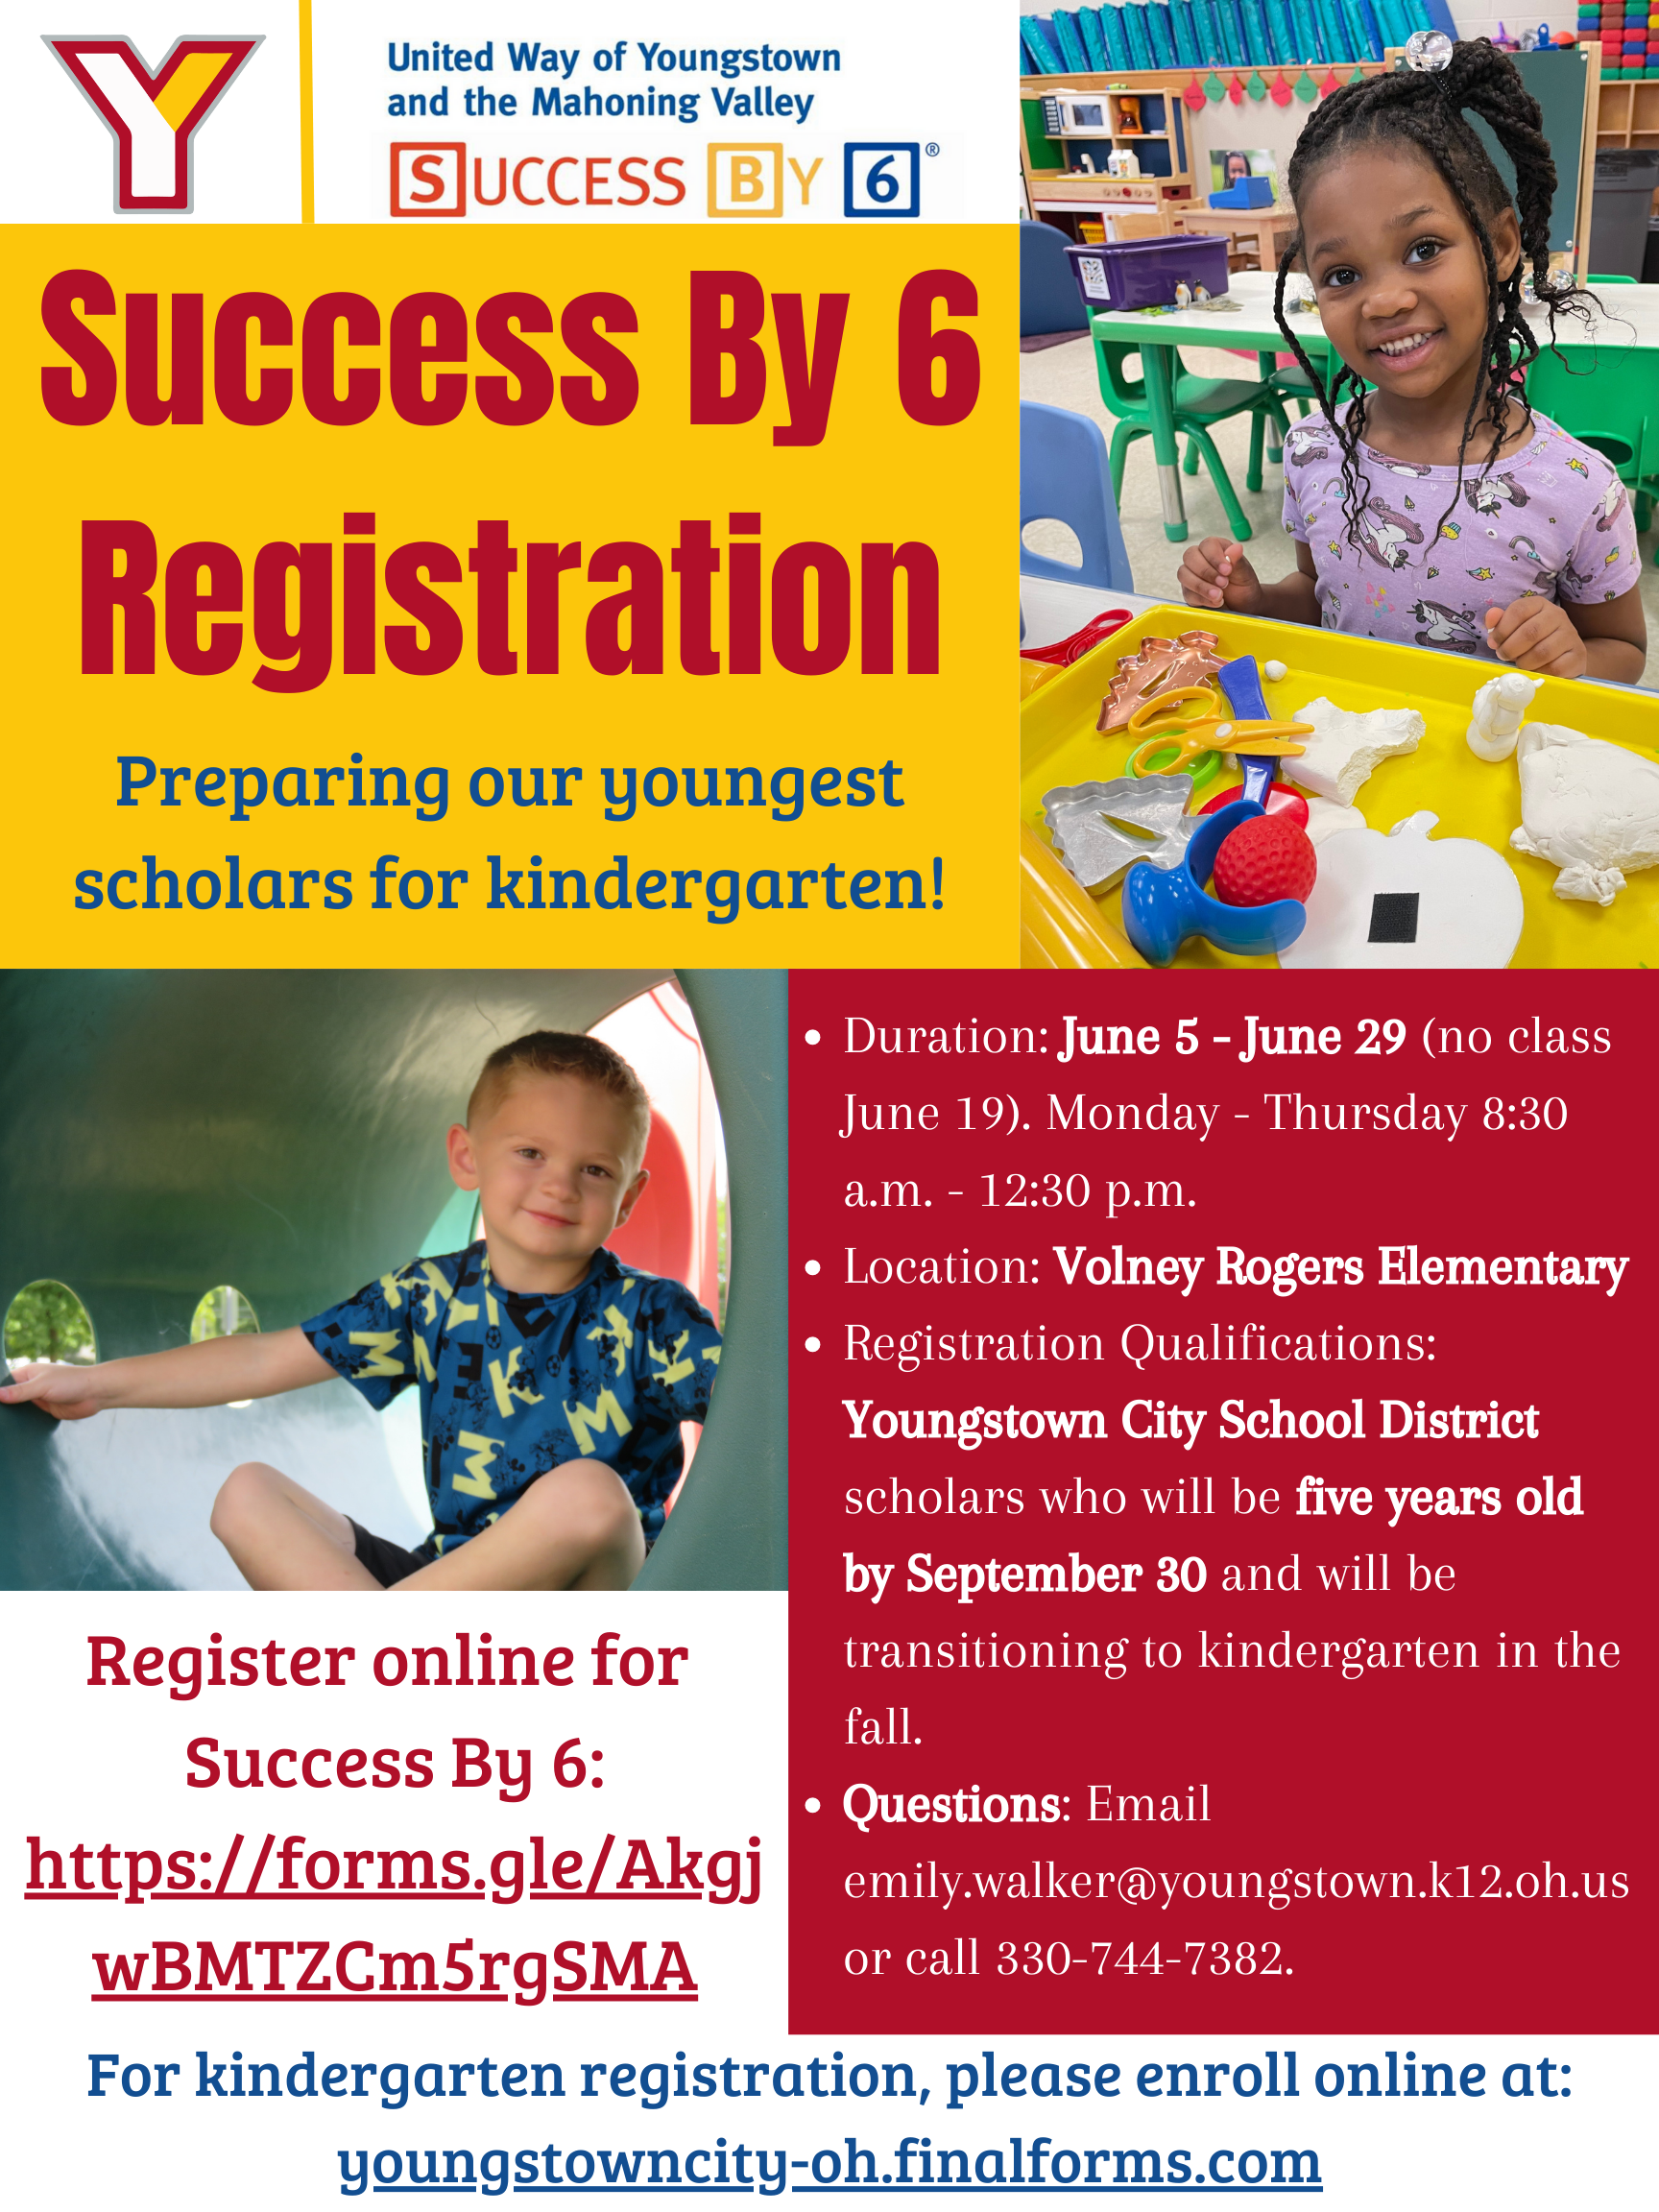 Success by 6 registration flyer with information on how to enroll using a google link or by contacting the Early Childhood Department